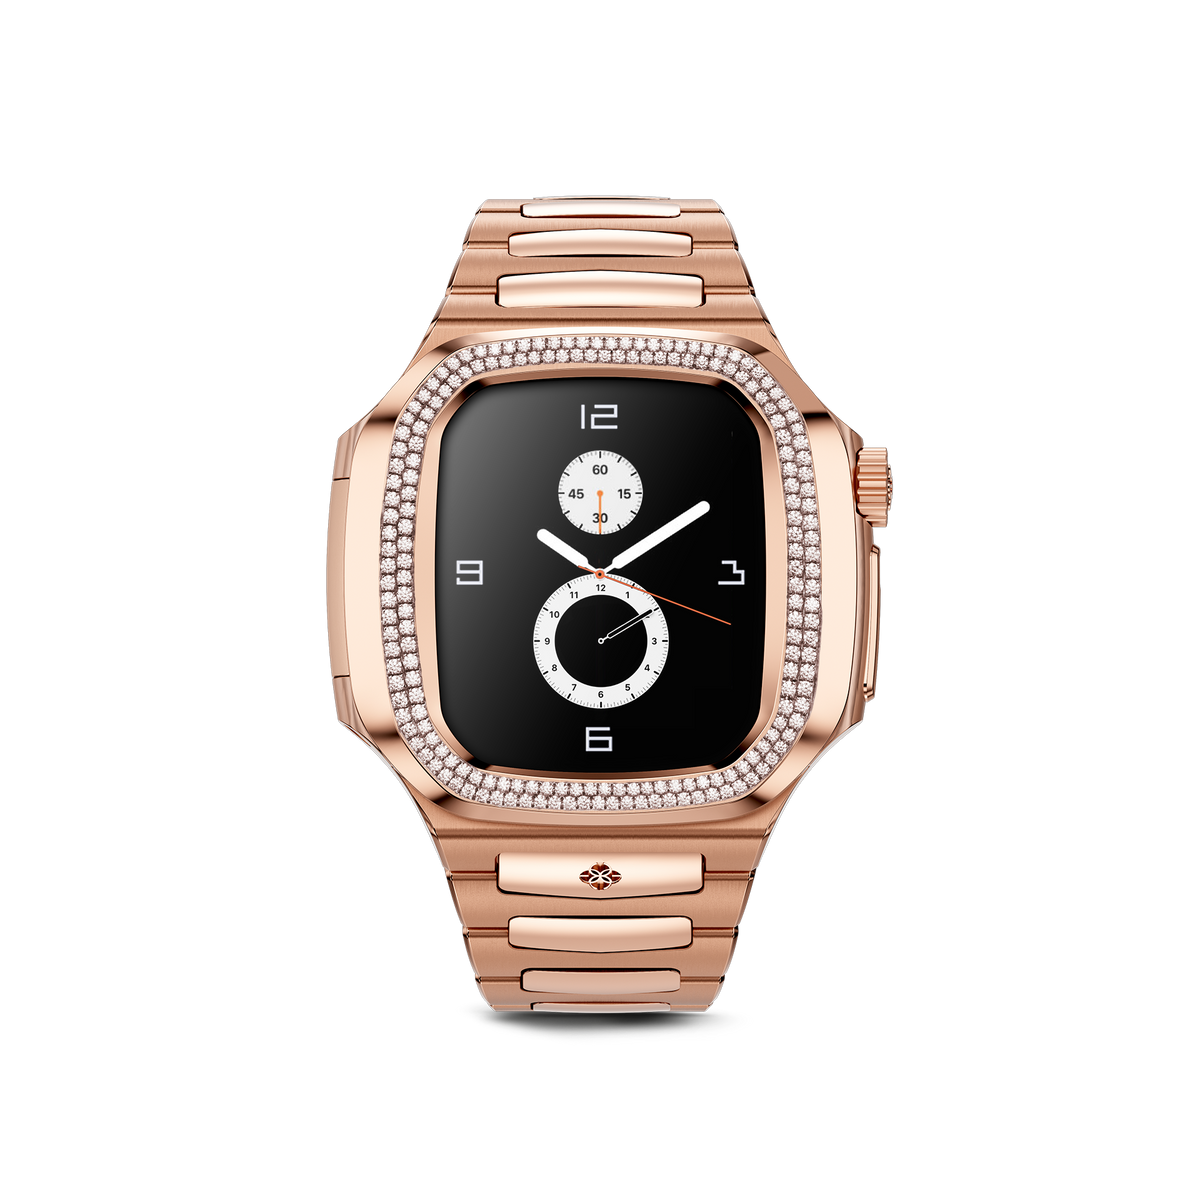 Apple Watch Case RO41 - Rose Gold MD